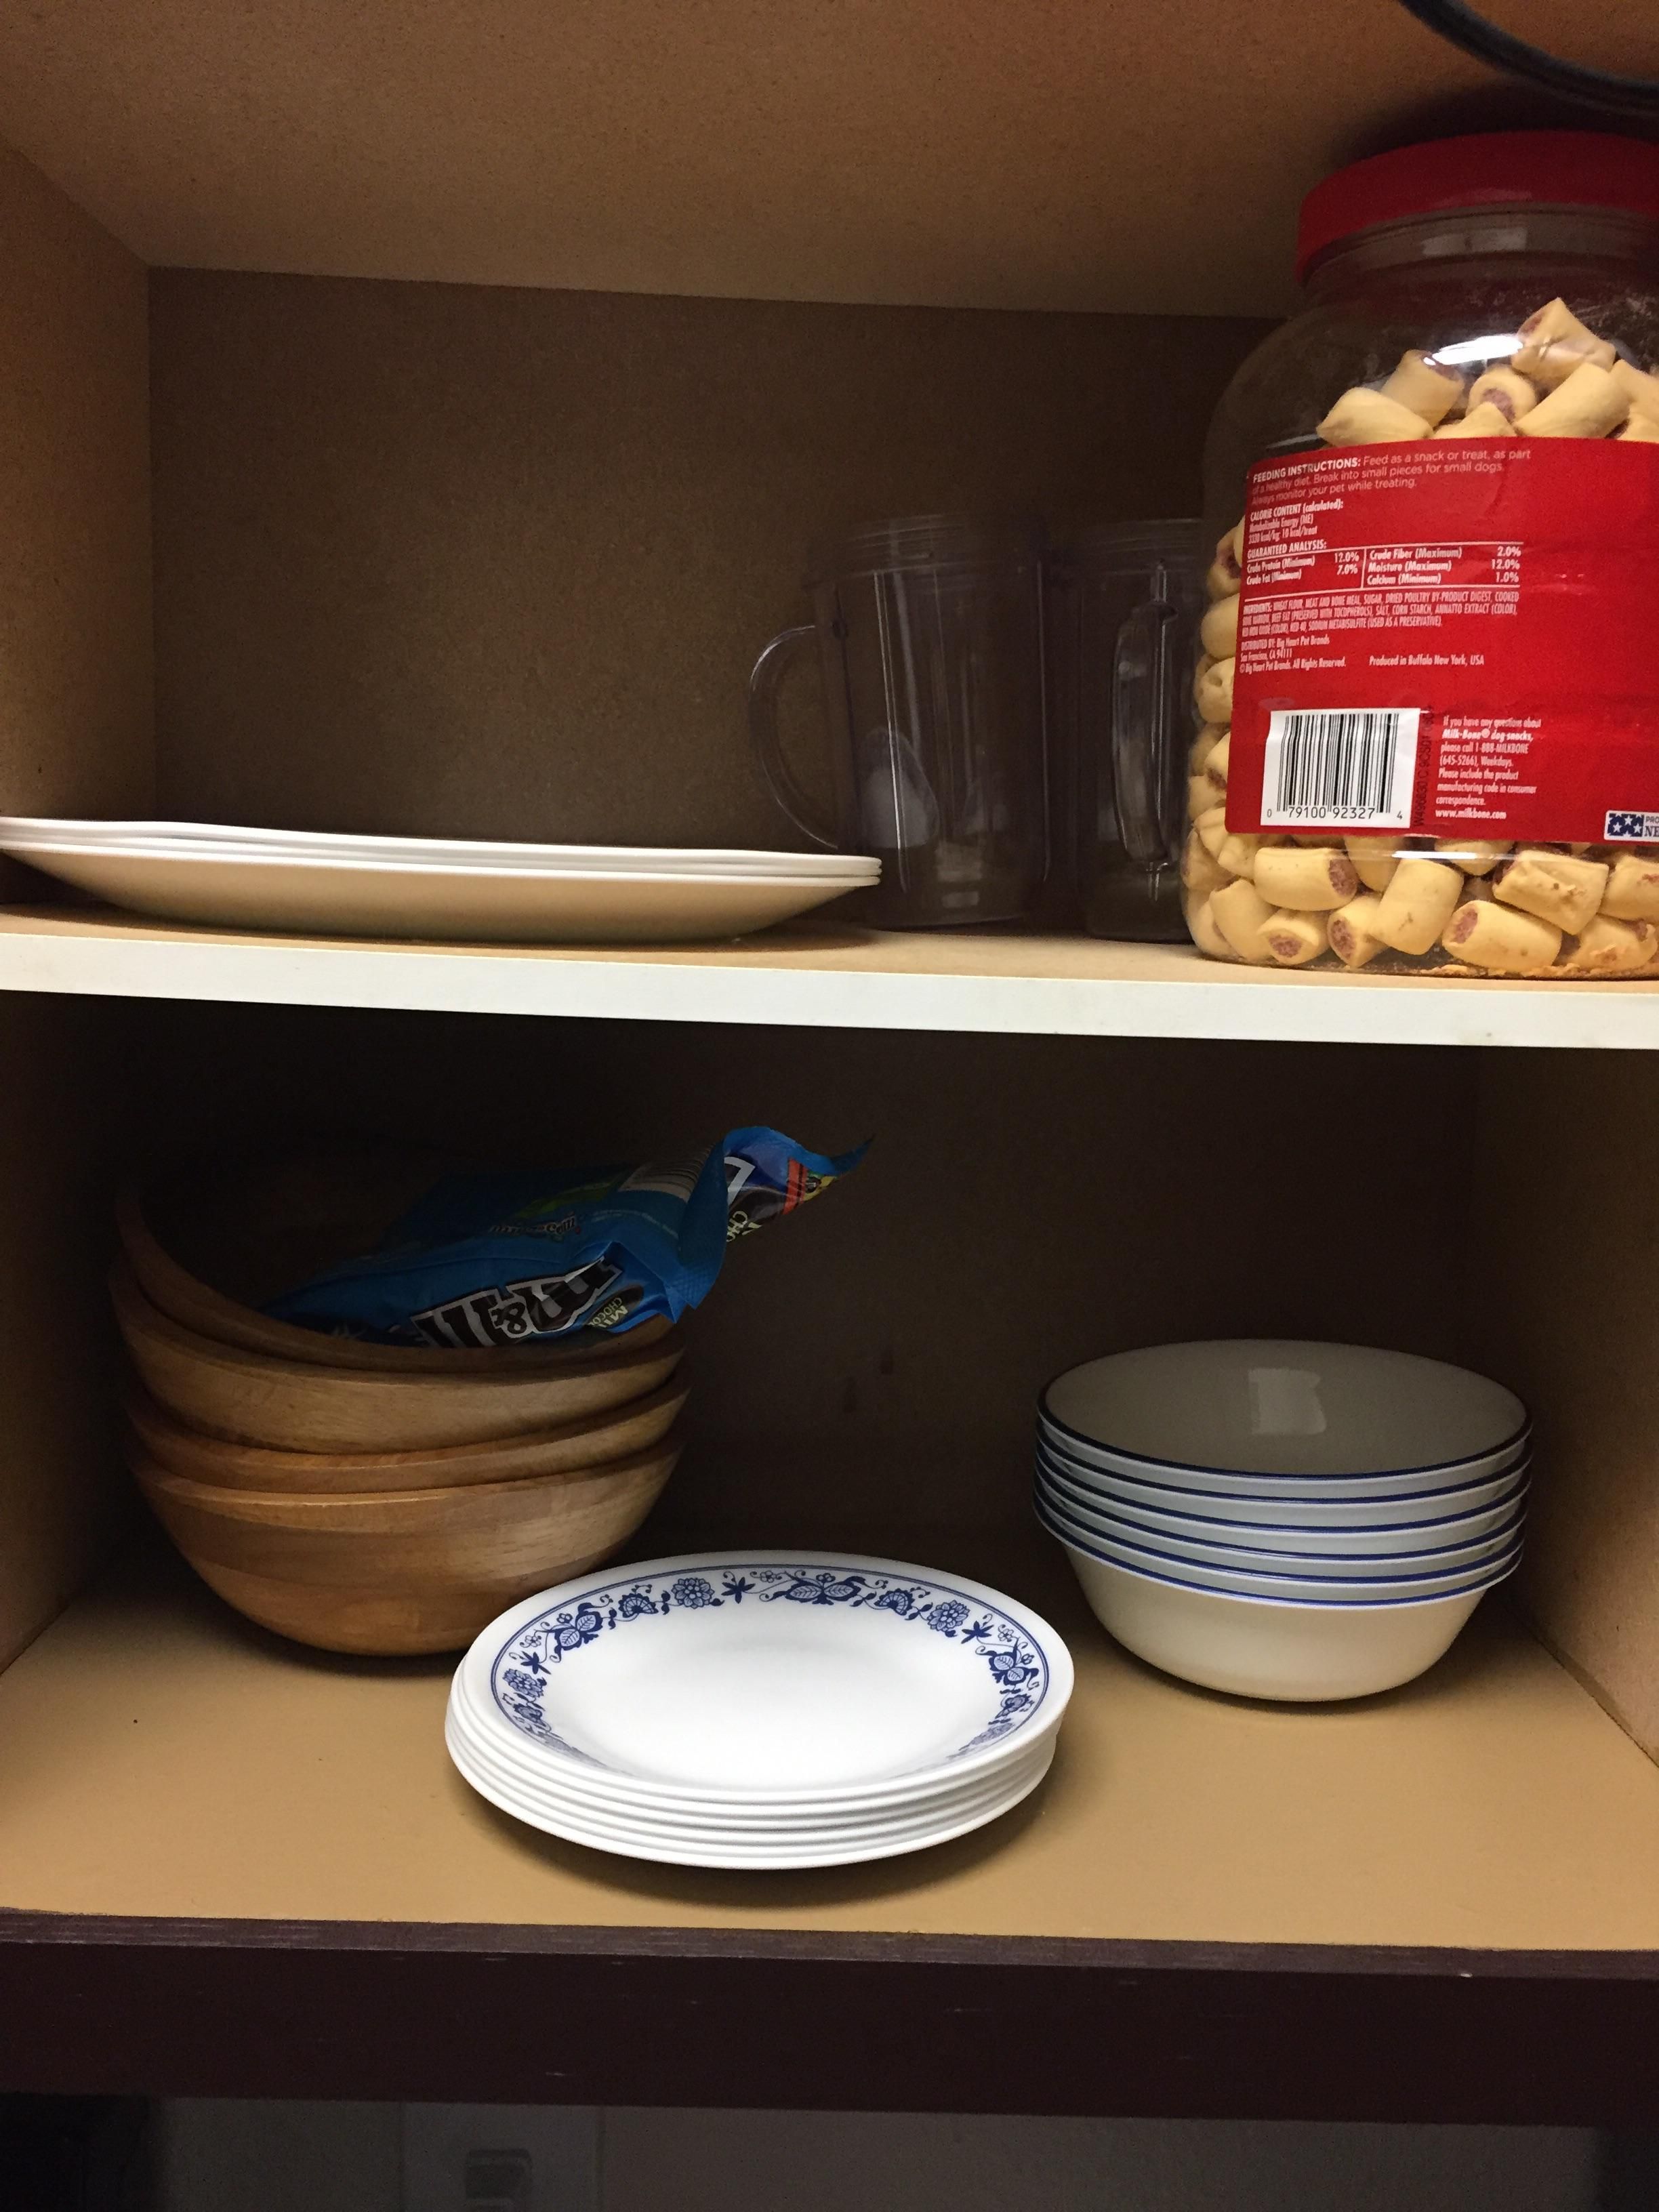 Sometimes I eat my wife's candy. Today she hid it from me; in the plate cabinet, where I get my plates from, every meal.